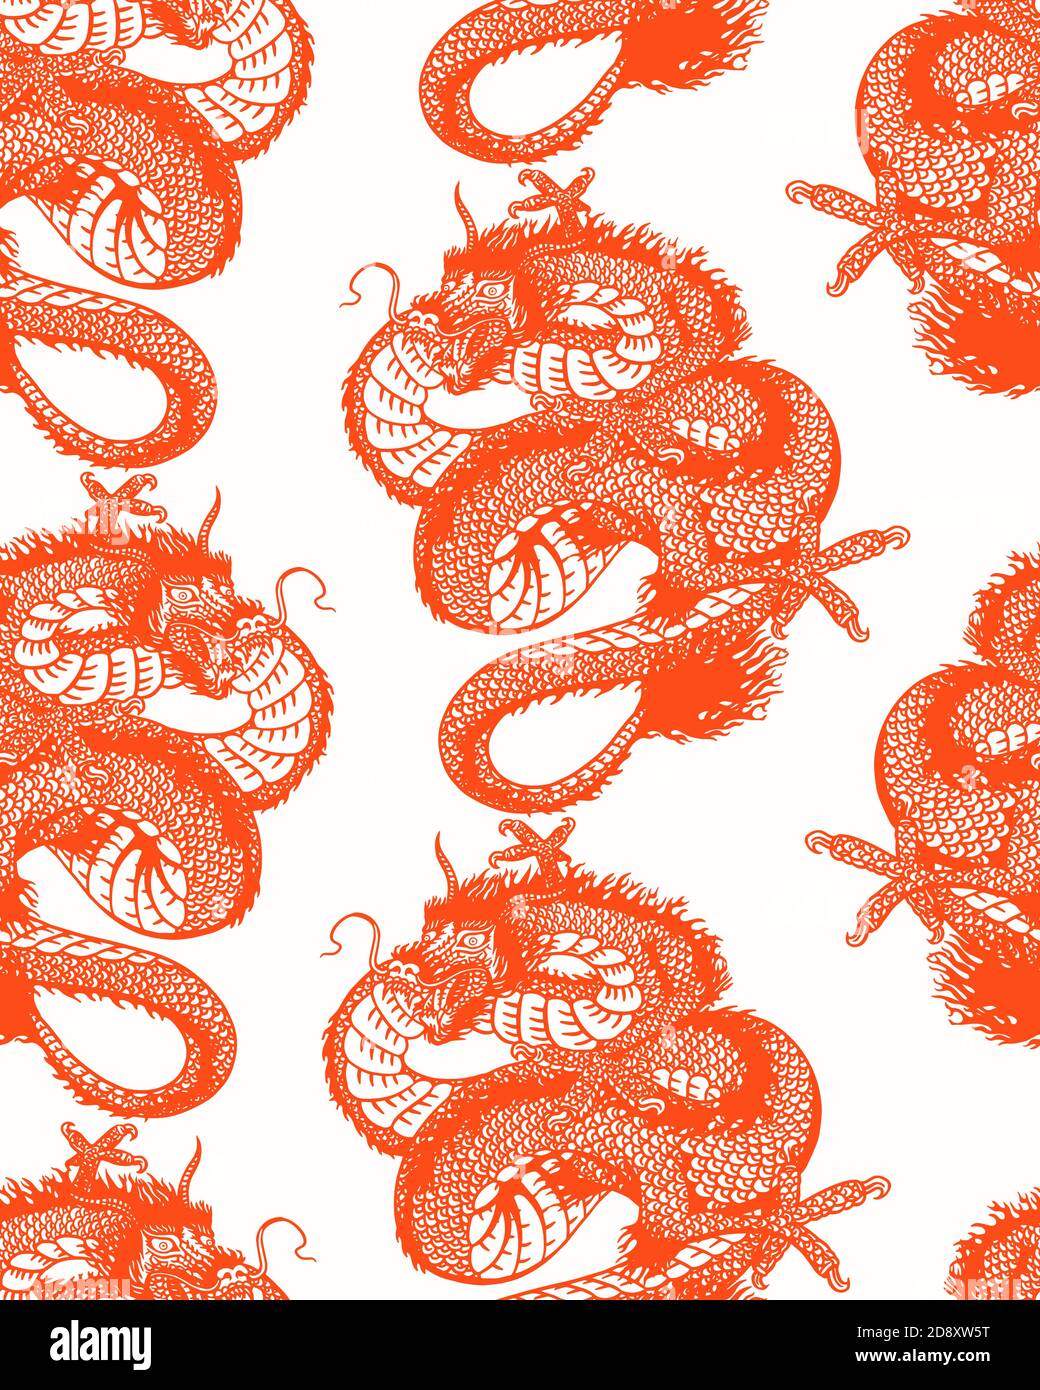 Japanese dragon. Seamless pattern. Mythological animal or Asian reptile Poster or banner. Symbol for tattoo or label. Engraved hand drawn Vintage old Stock Vector